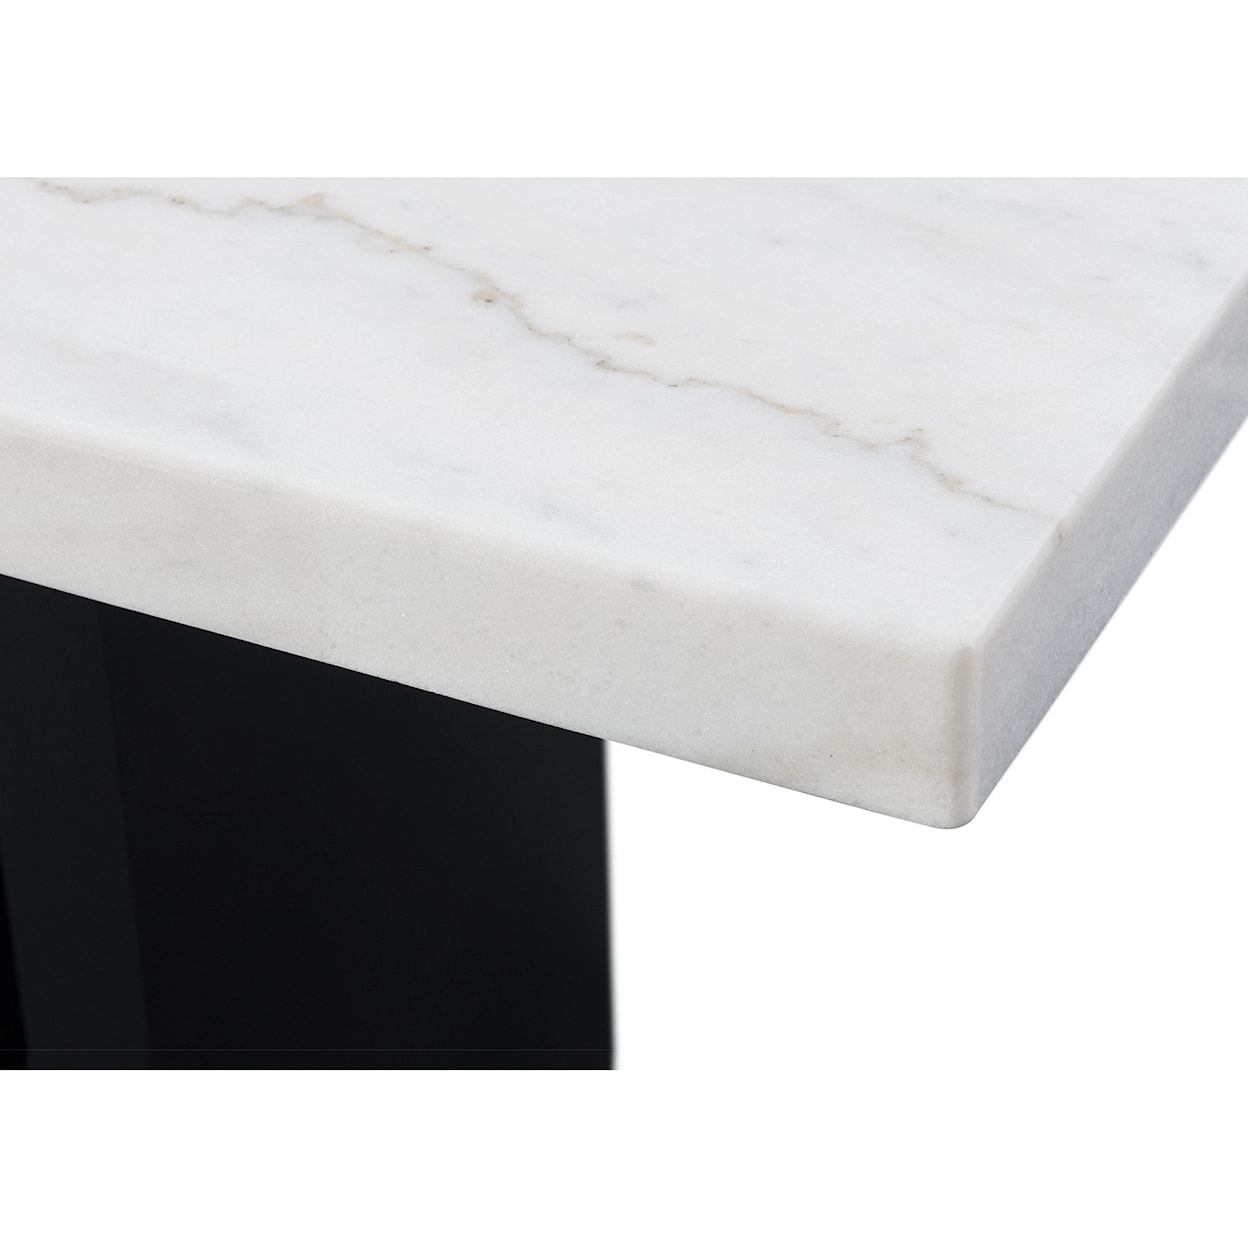 Elements Valentino Marble Counter Height Dining Table